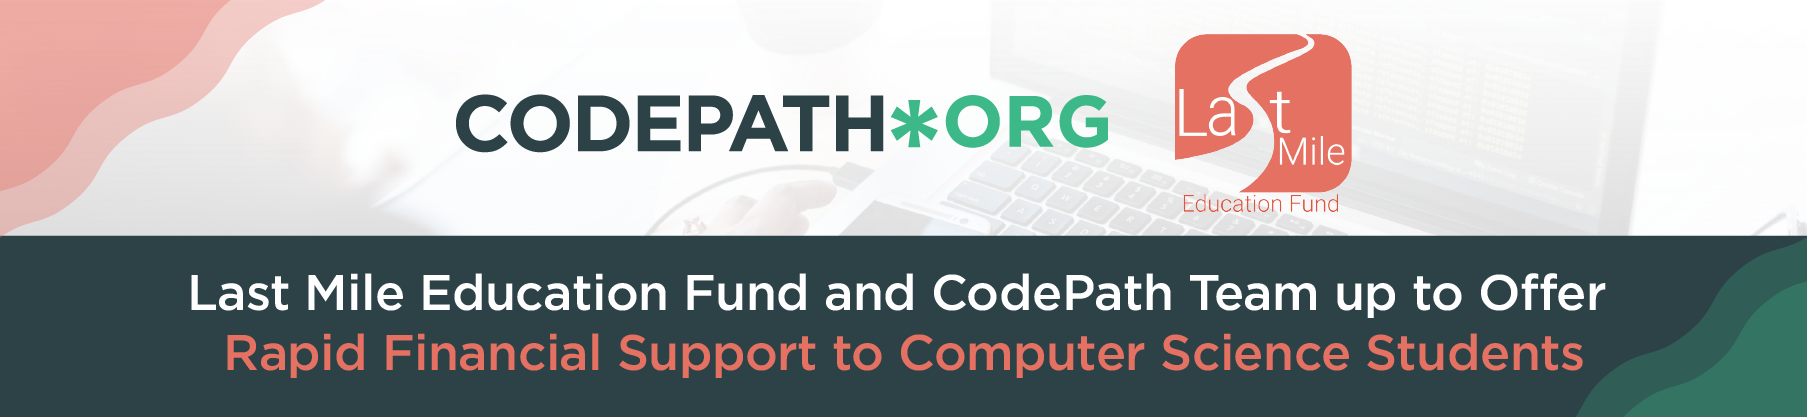 CodePath is working with Last Mile Education Fund